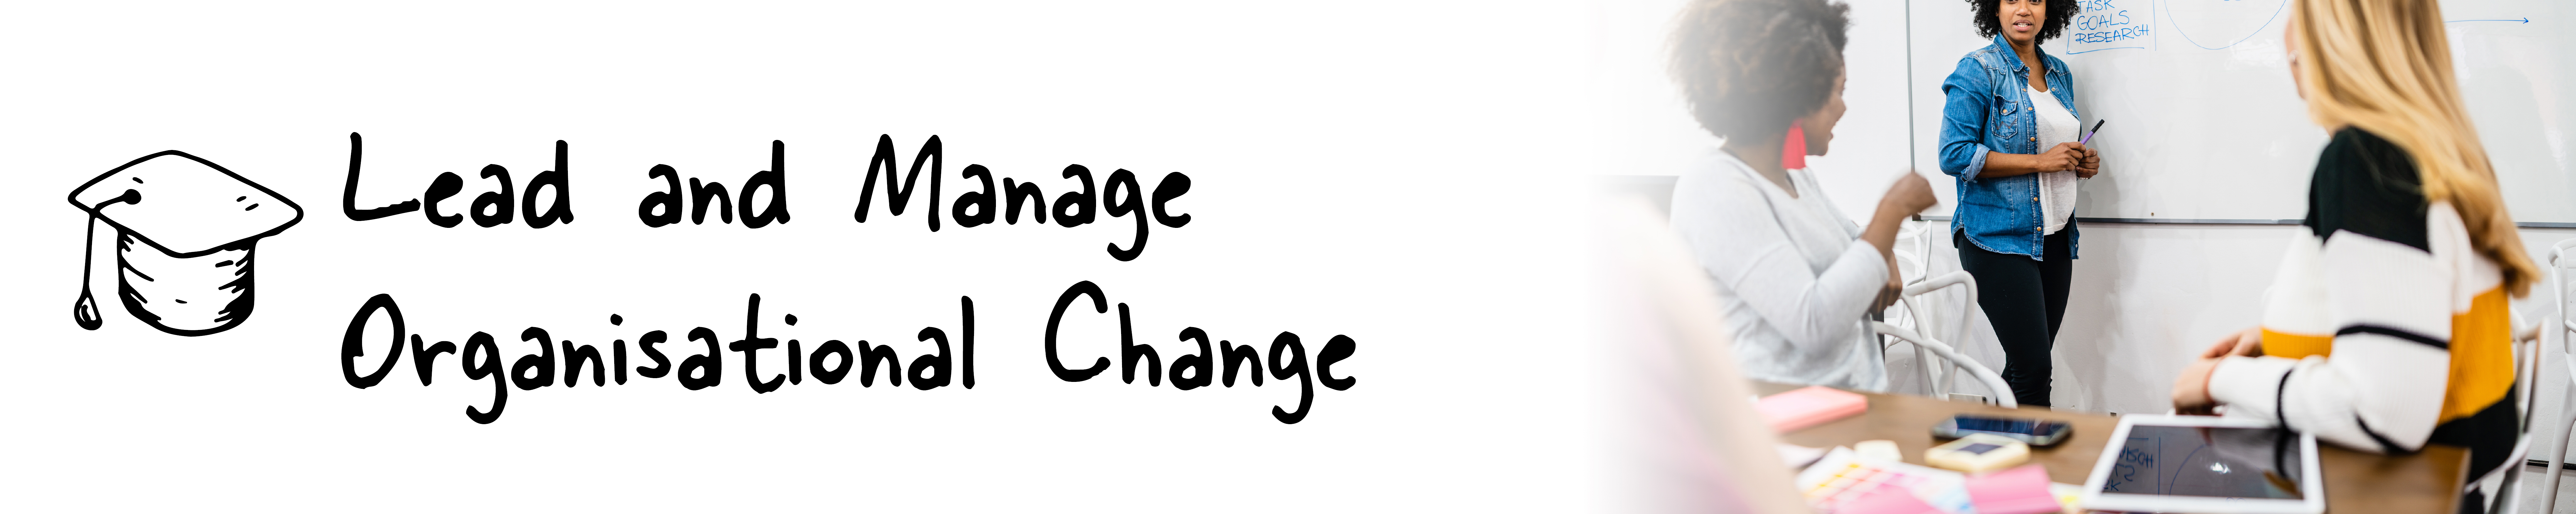 Lead and Manage Organisational Change